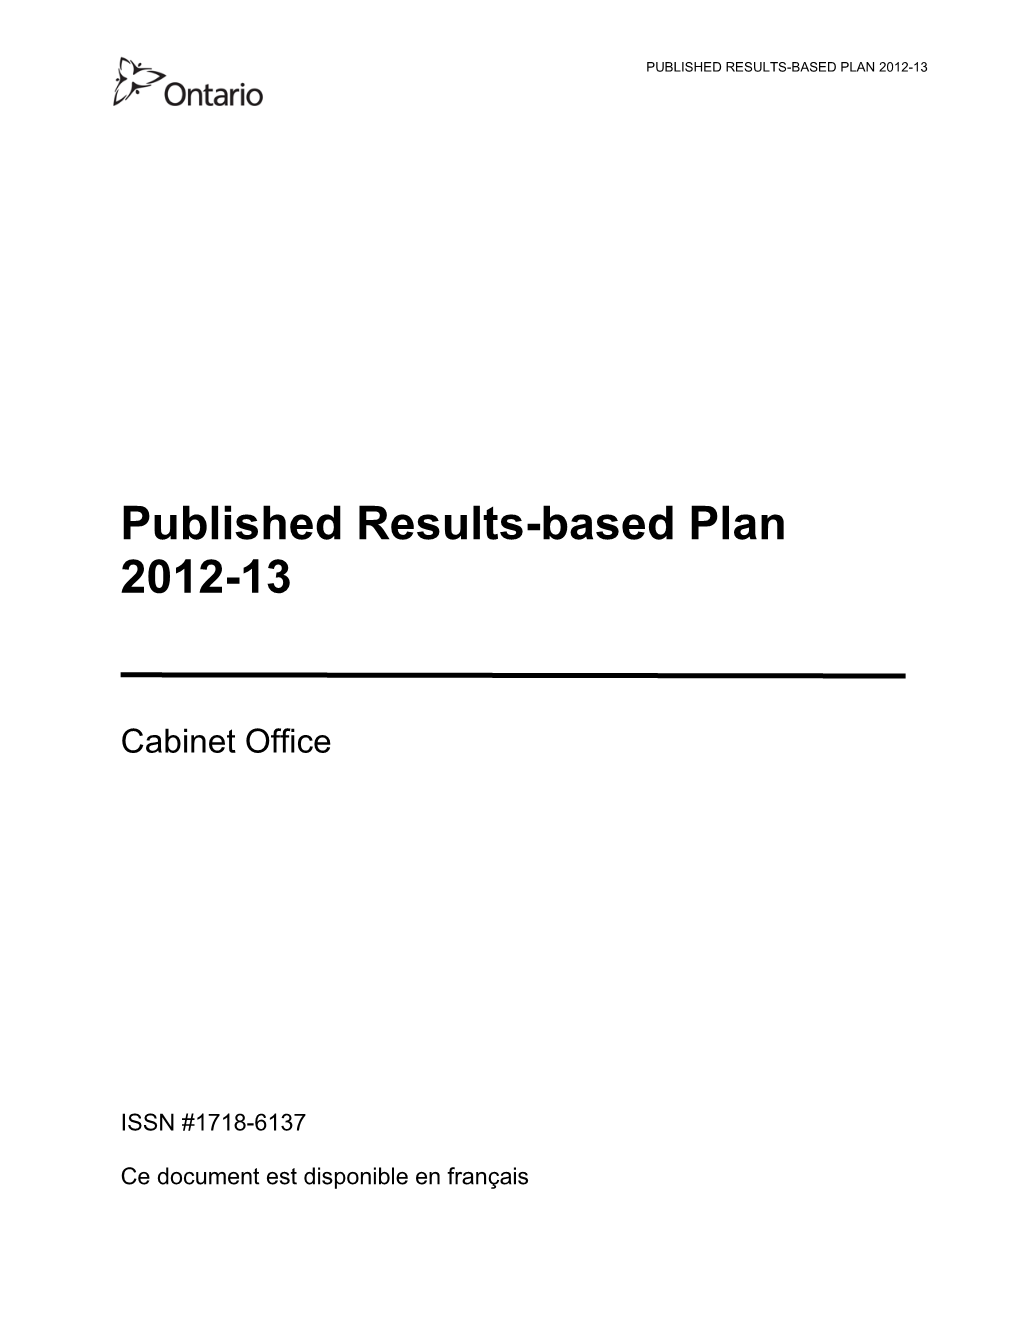 Results-Based Plan Briefing Book